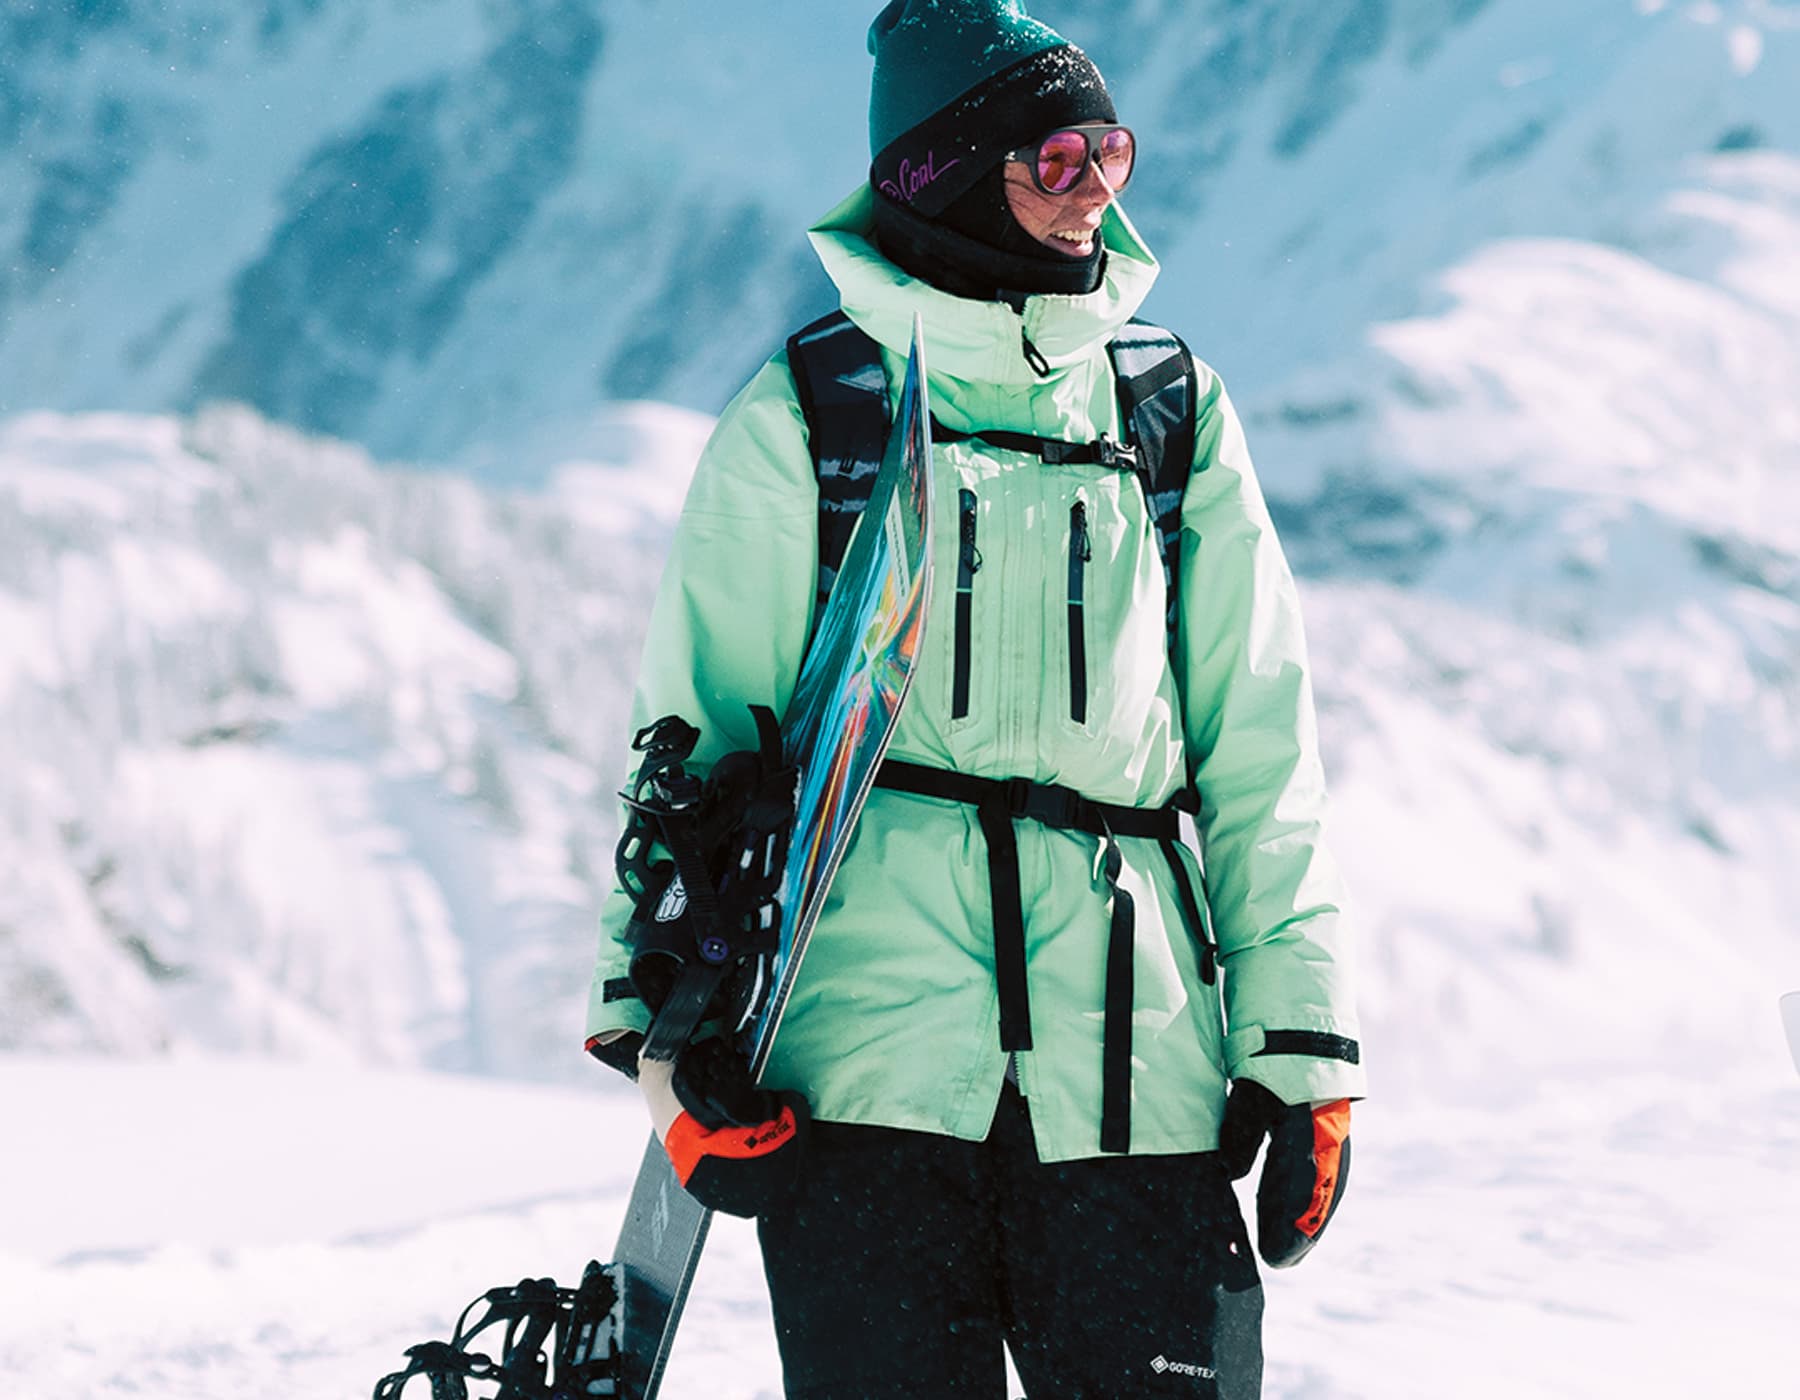 Female snowboarder standing in the snow high uptop a sunny mountain holding a snowboard. She is wearing a green 686 jacket, mittens, winter hat and glasses.